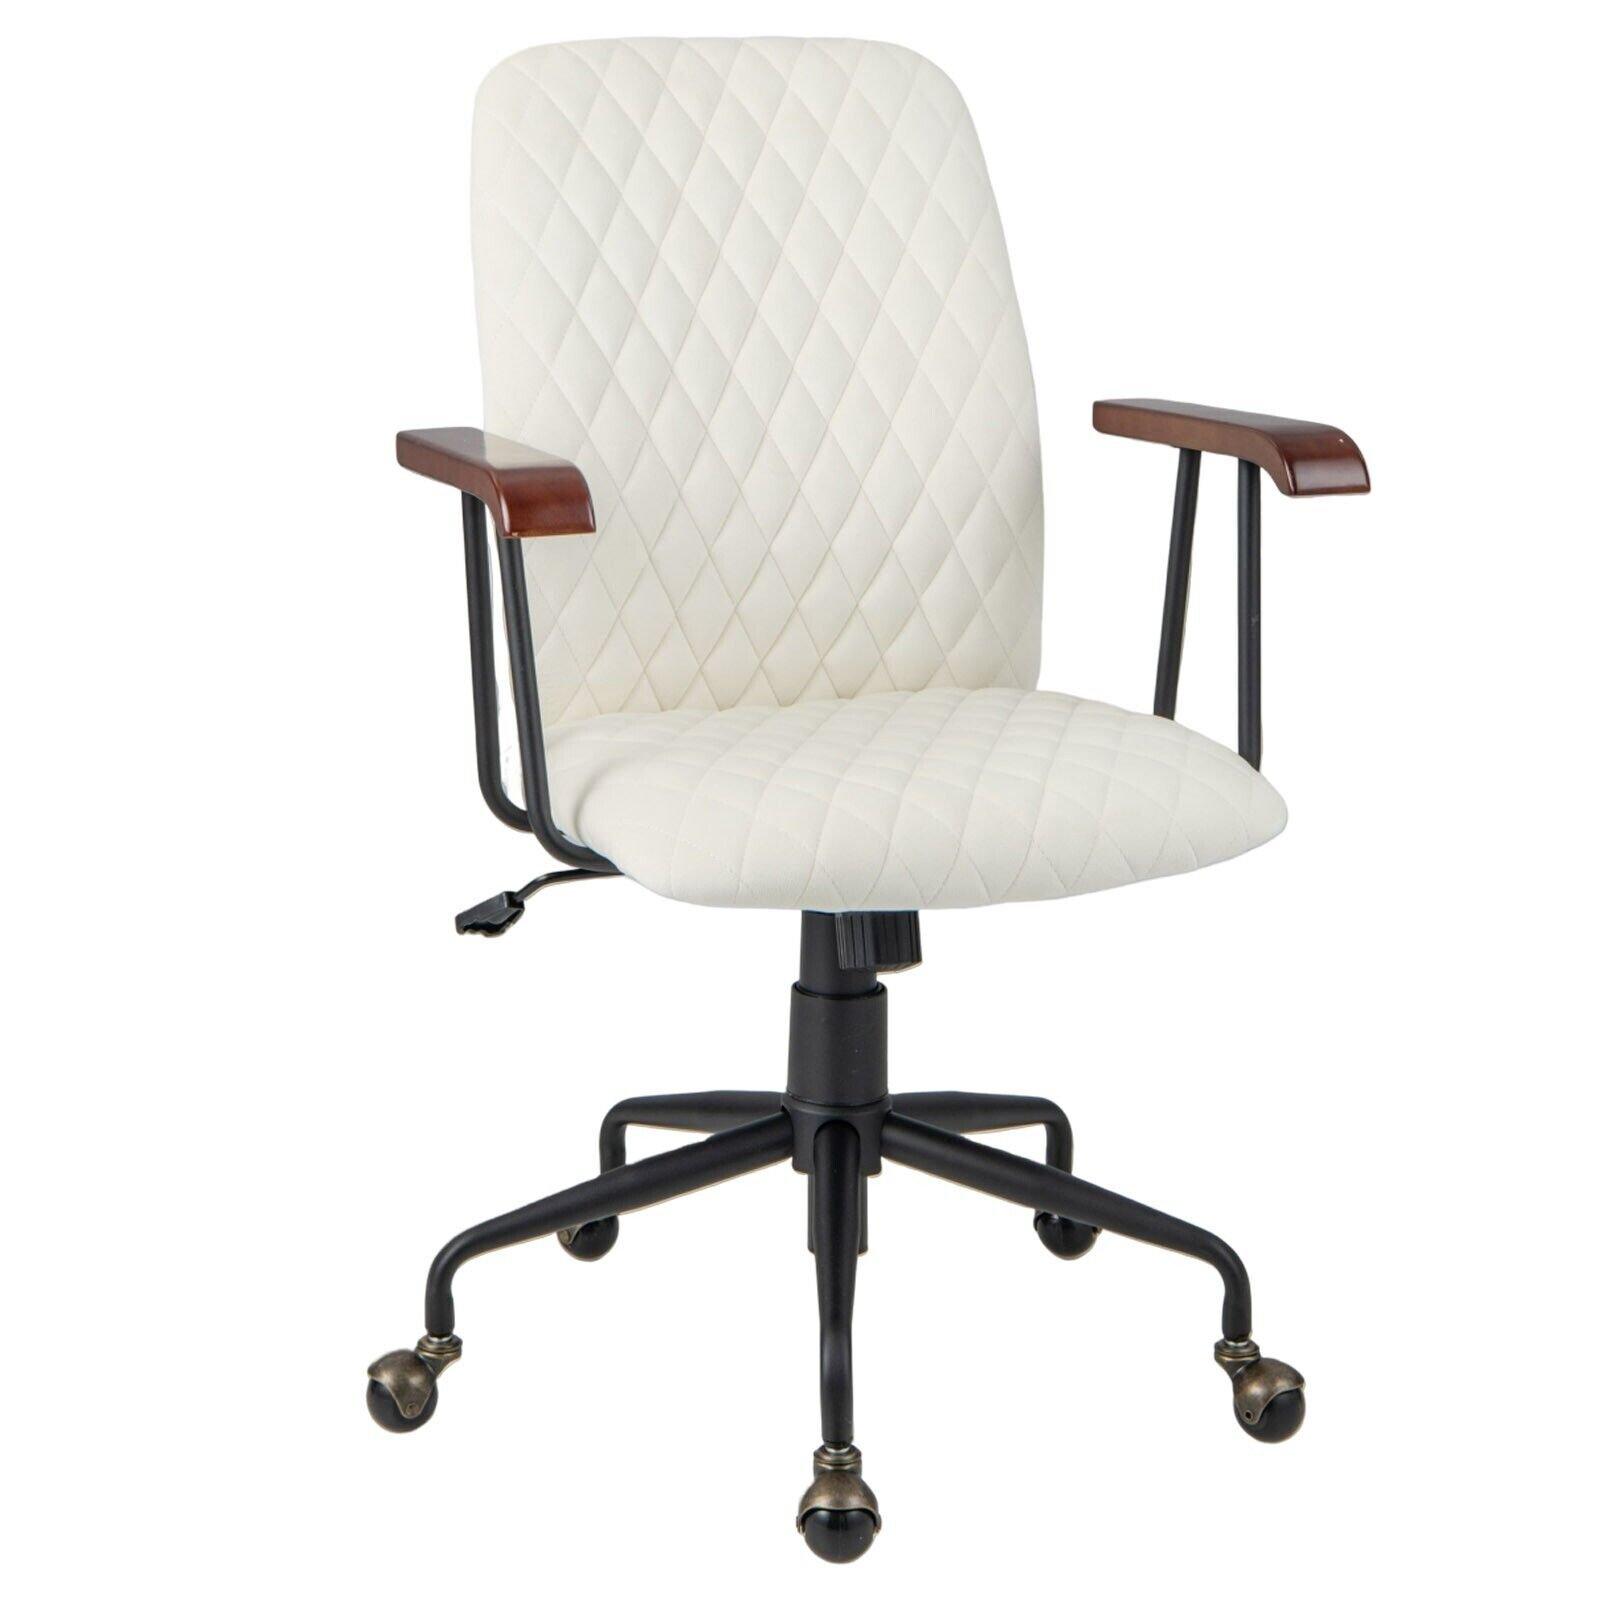 Velvet Leisure Chair Adjustable Swivel Home Office Chair Rolling Computer Chair Beige